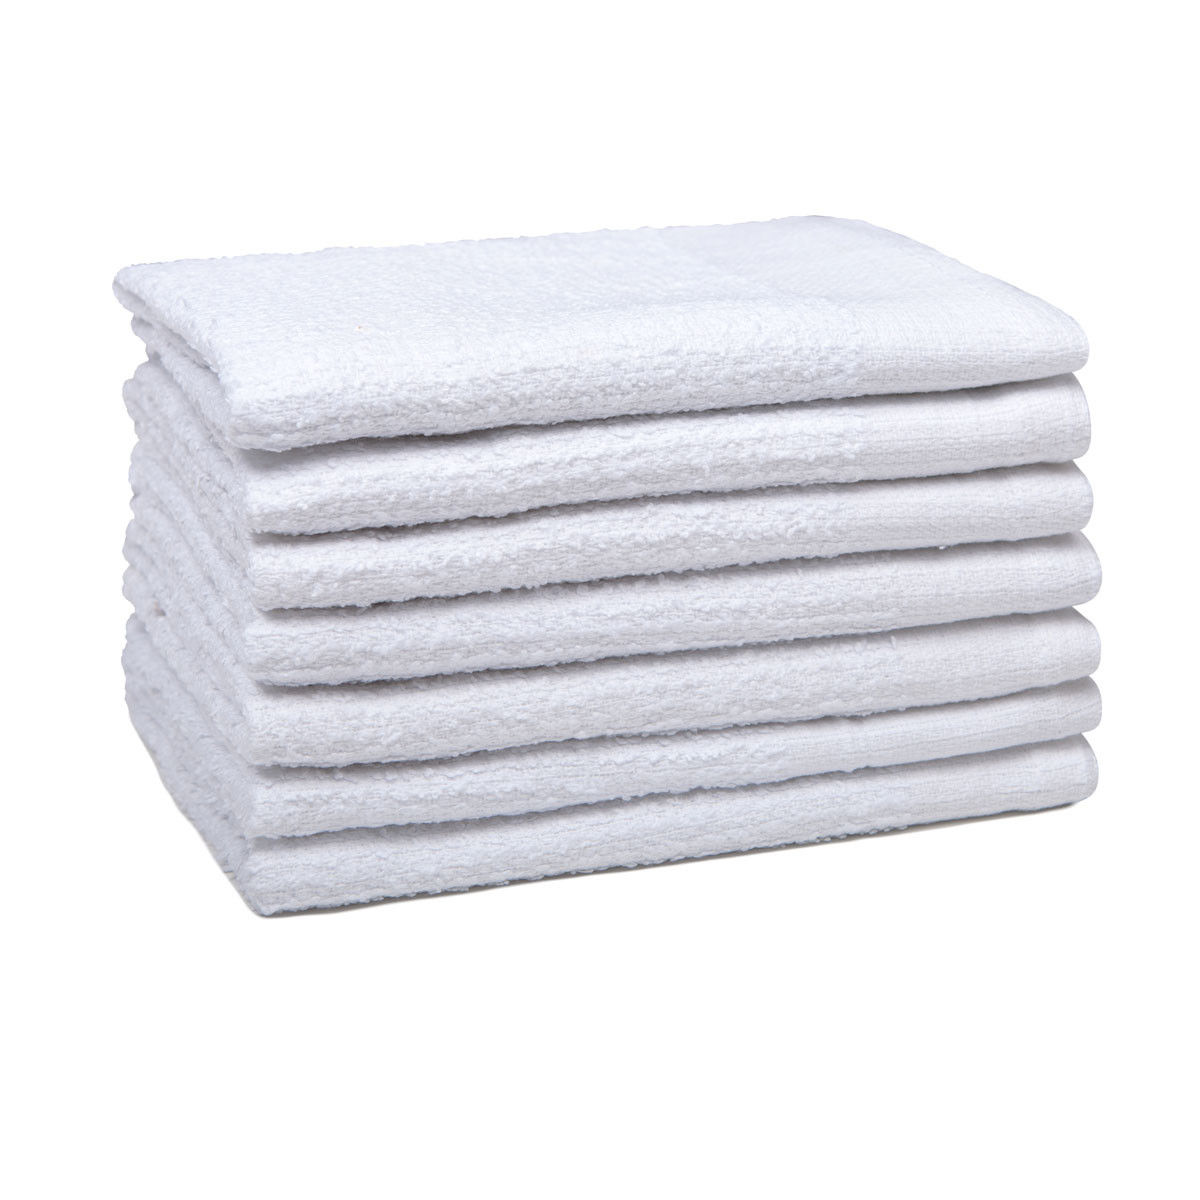 What is the quantity of bar towels packed in a bale of Wholesale Bar Mop Towels by Intralin?